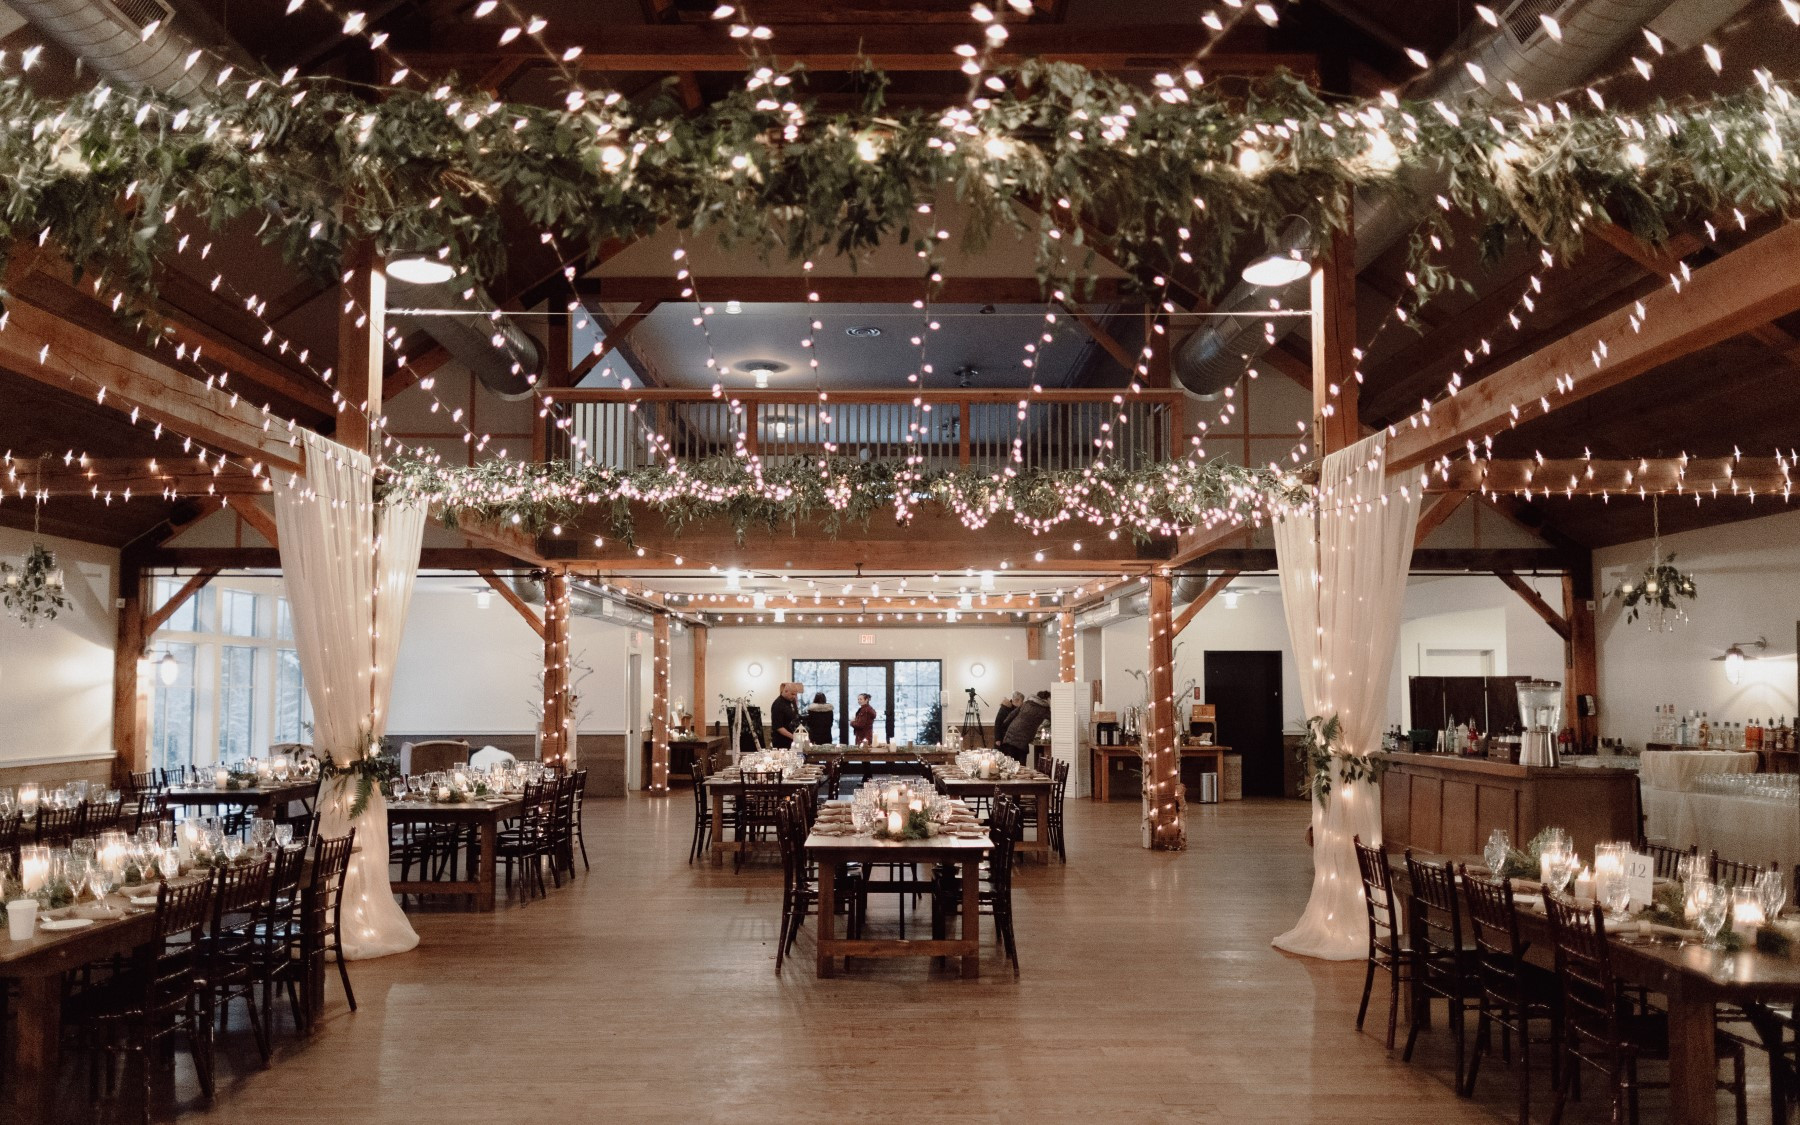 event barn decorated for a winter wedding with drapery